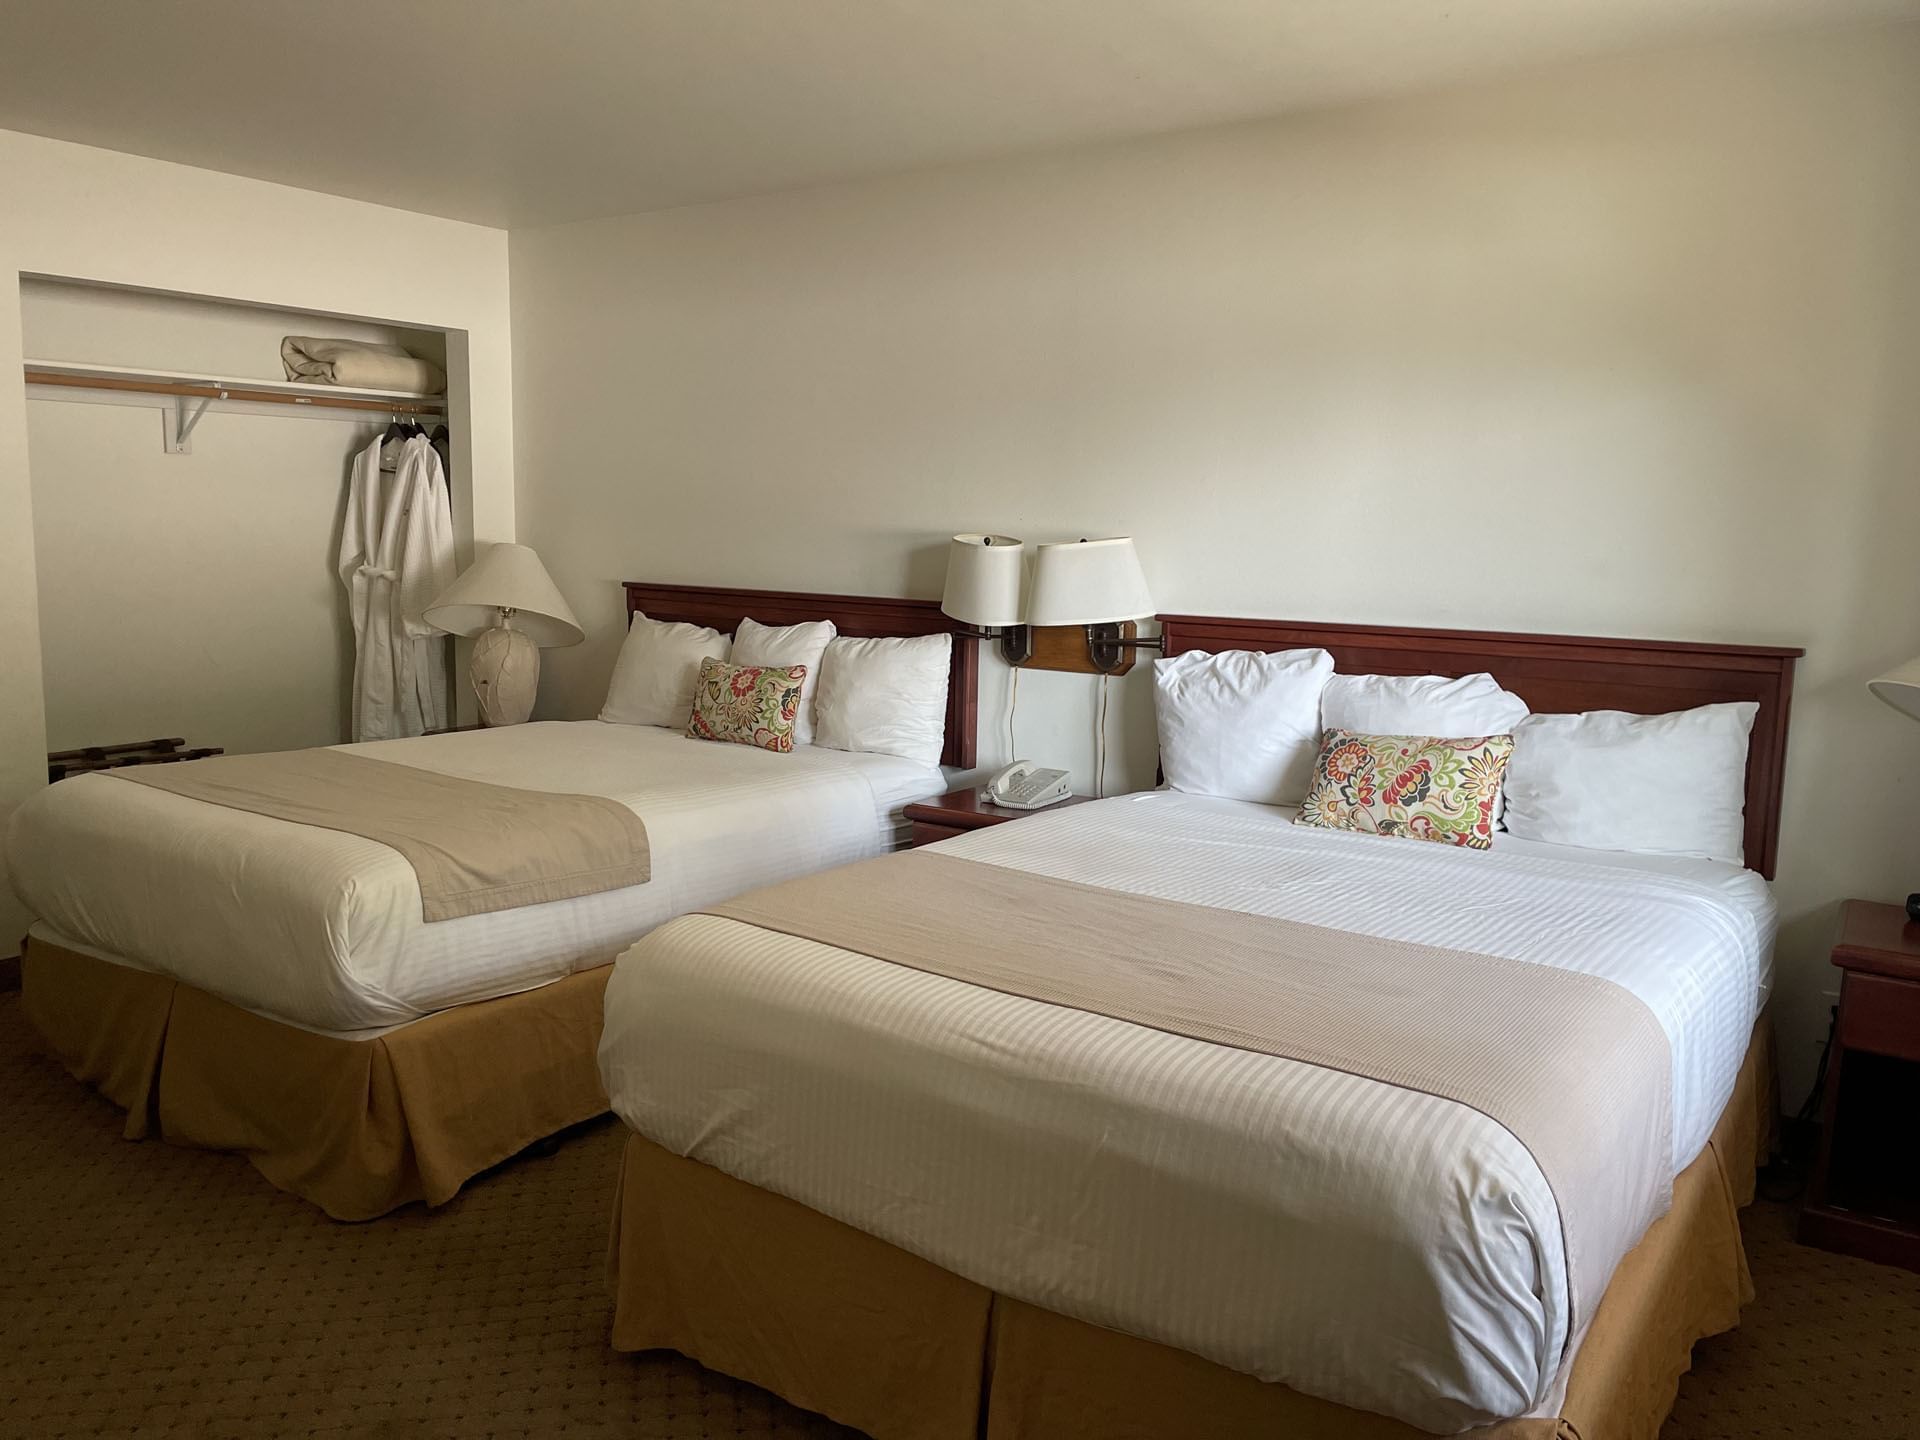 Beds in Standard Double Queen Room at Carson Hot Springs Resort